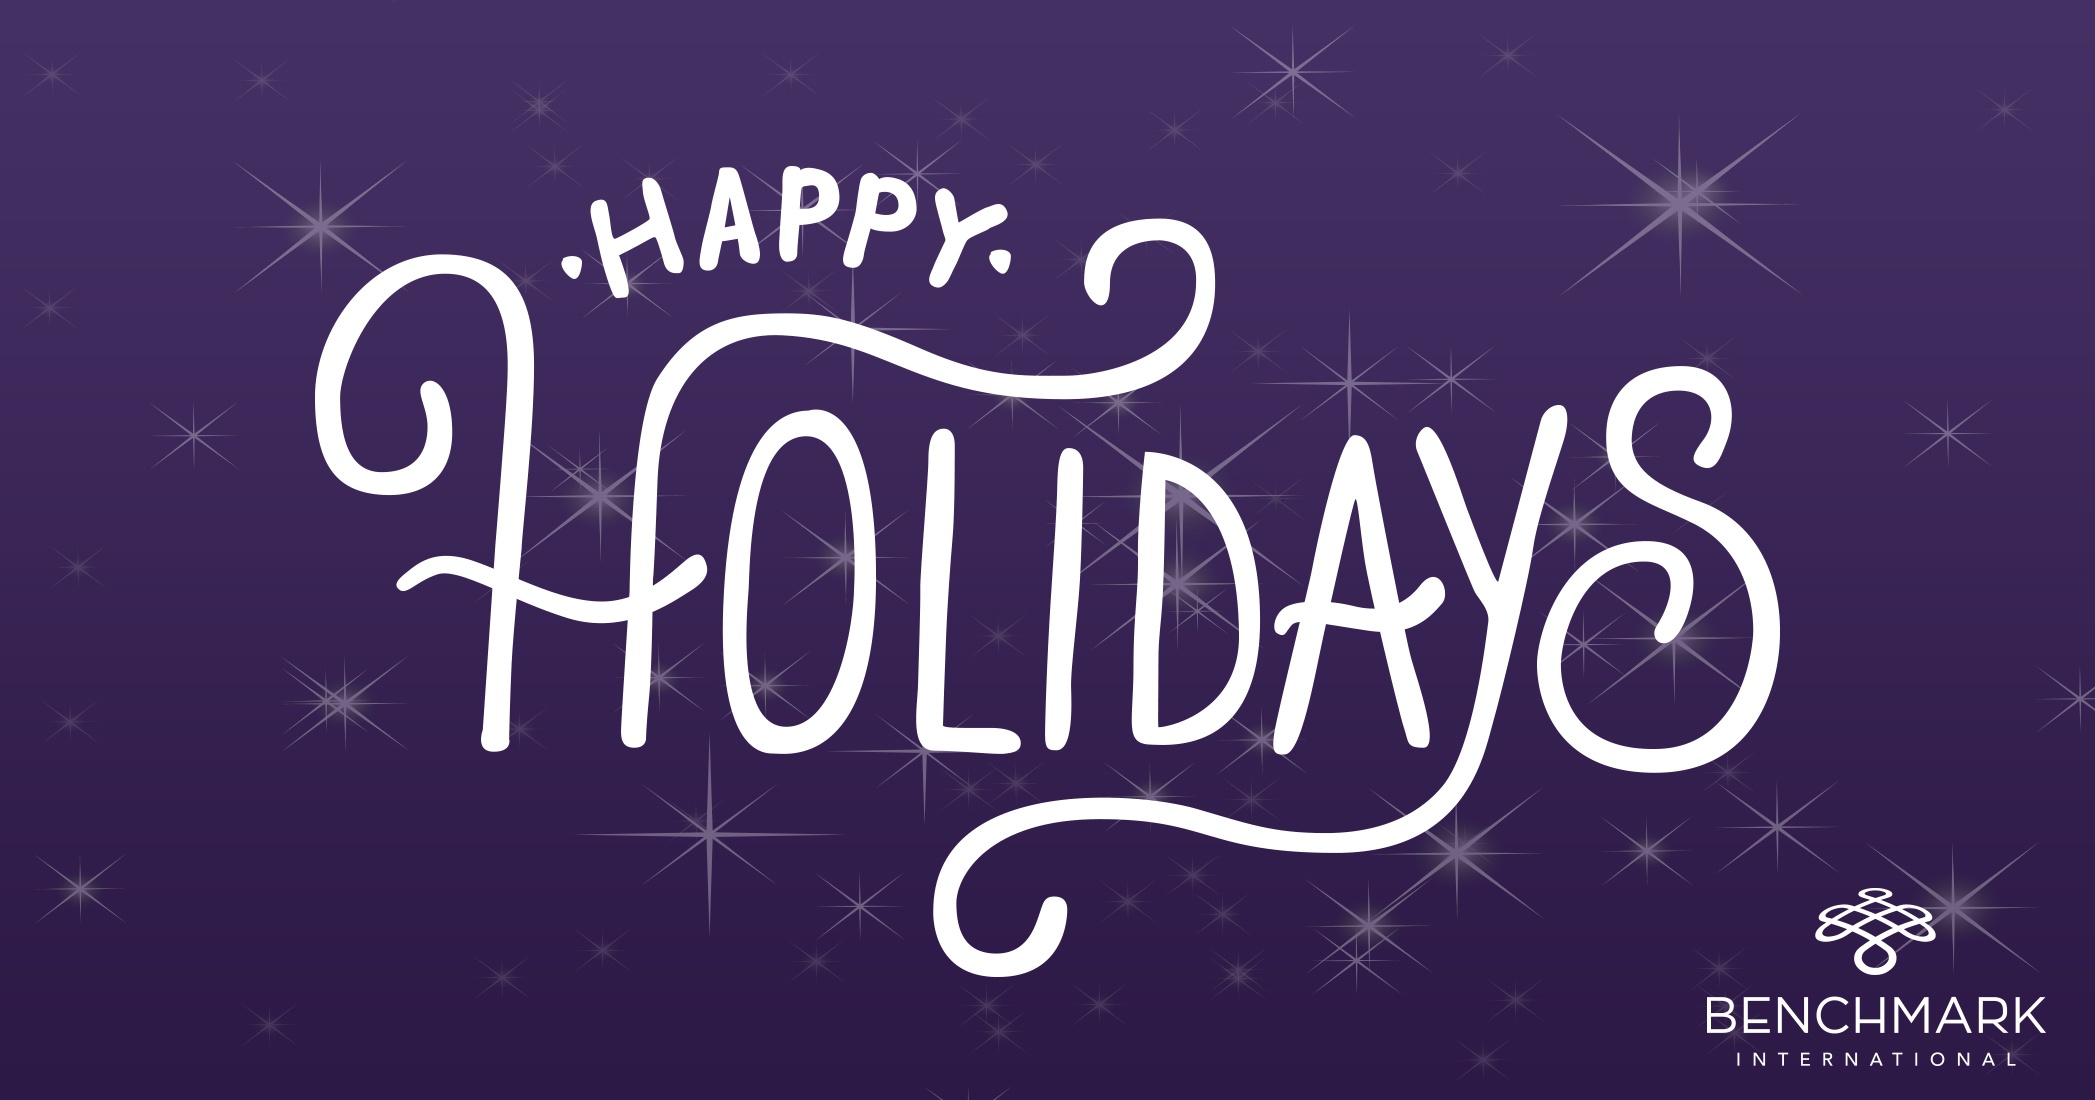 We hope your holiday season is merry and bright!